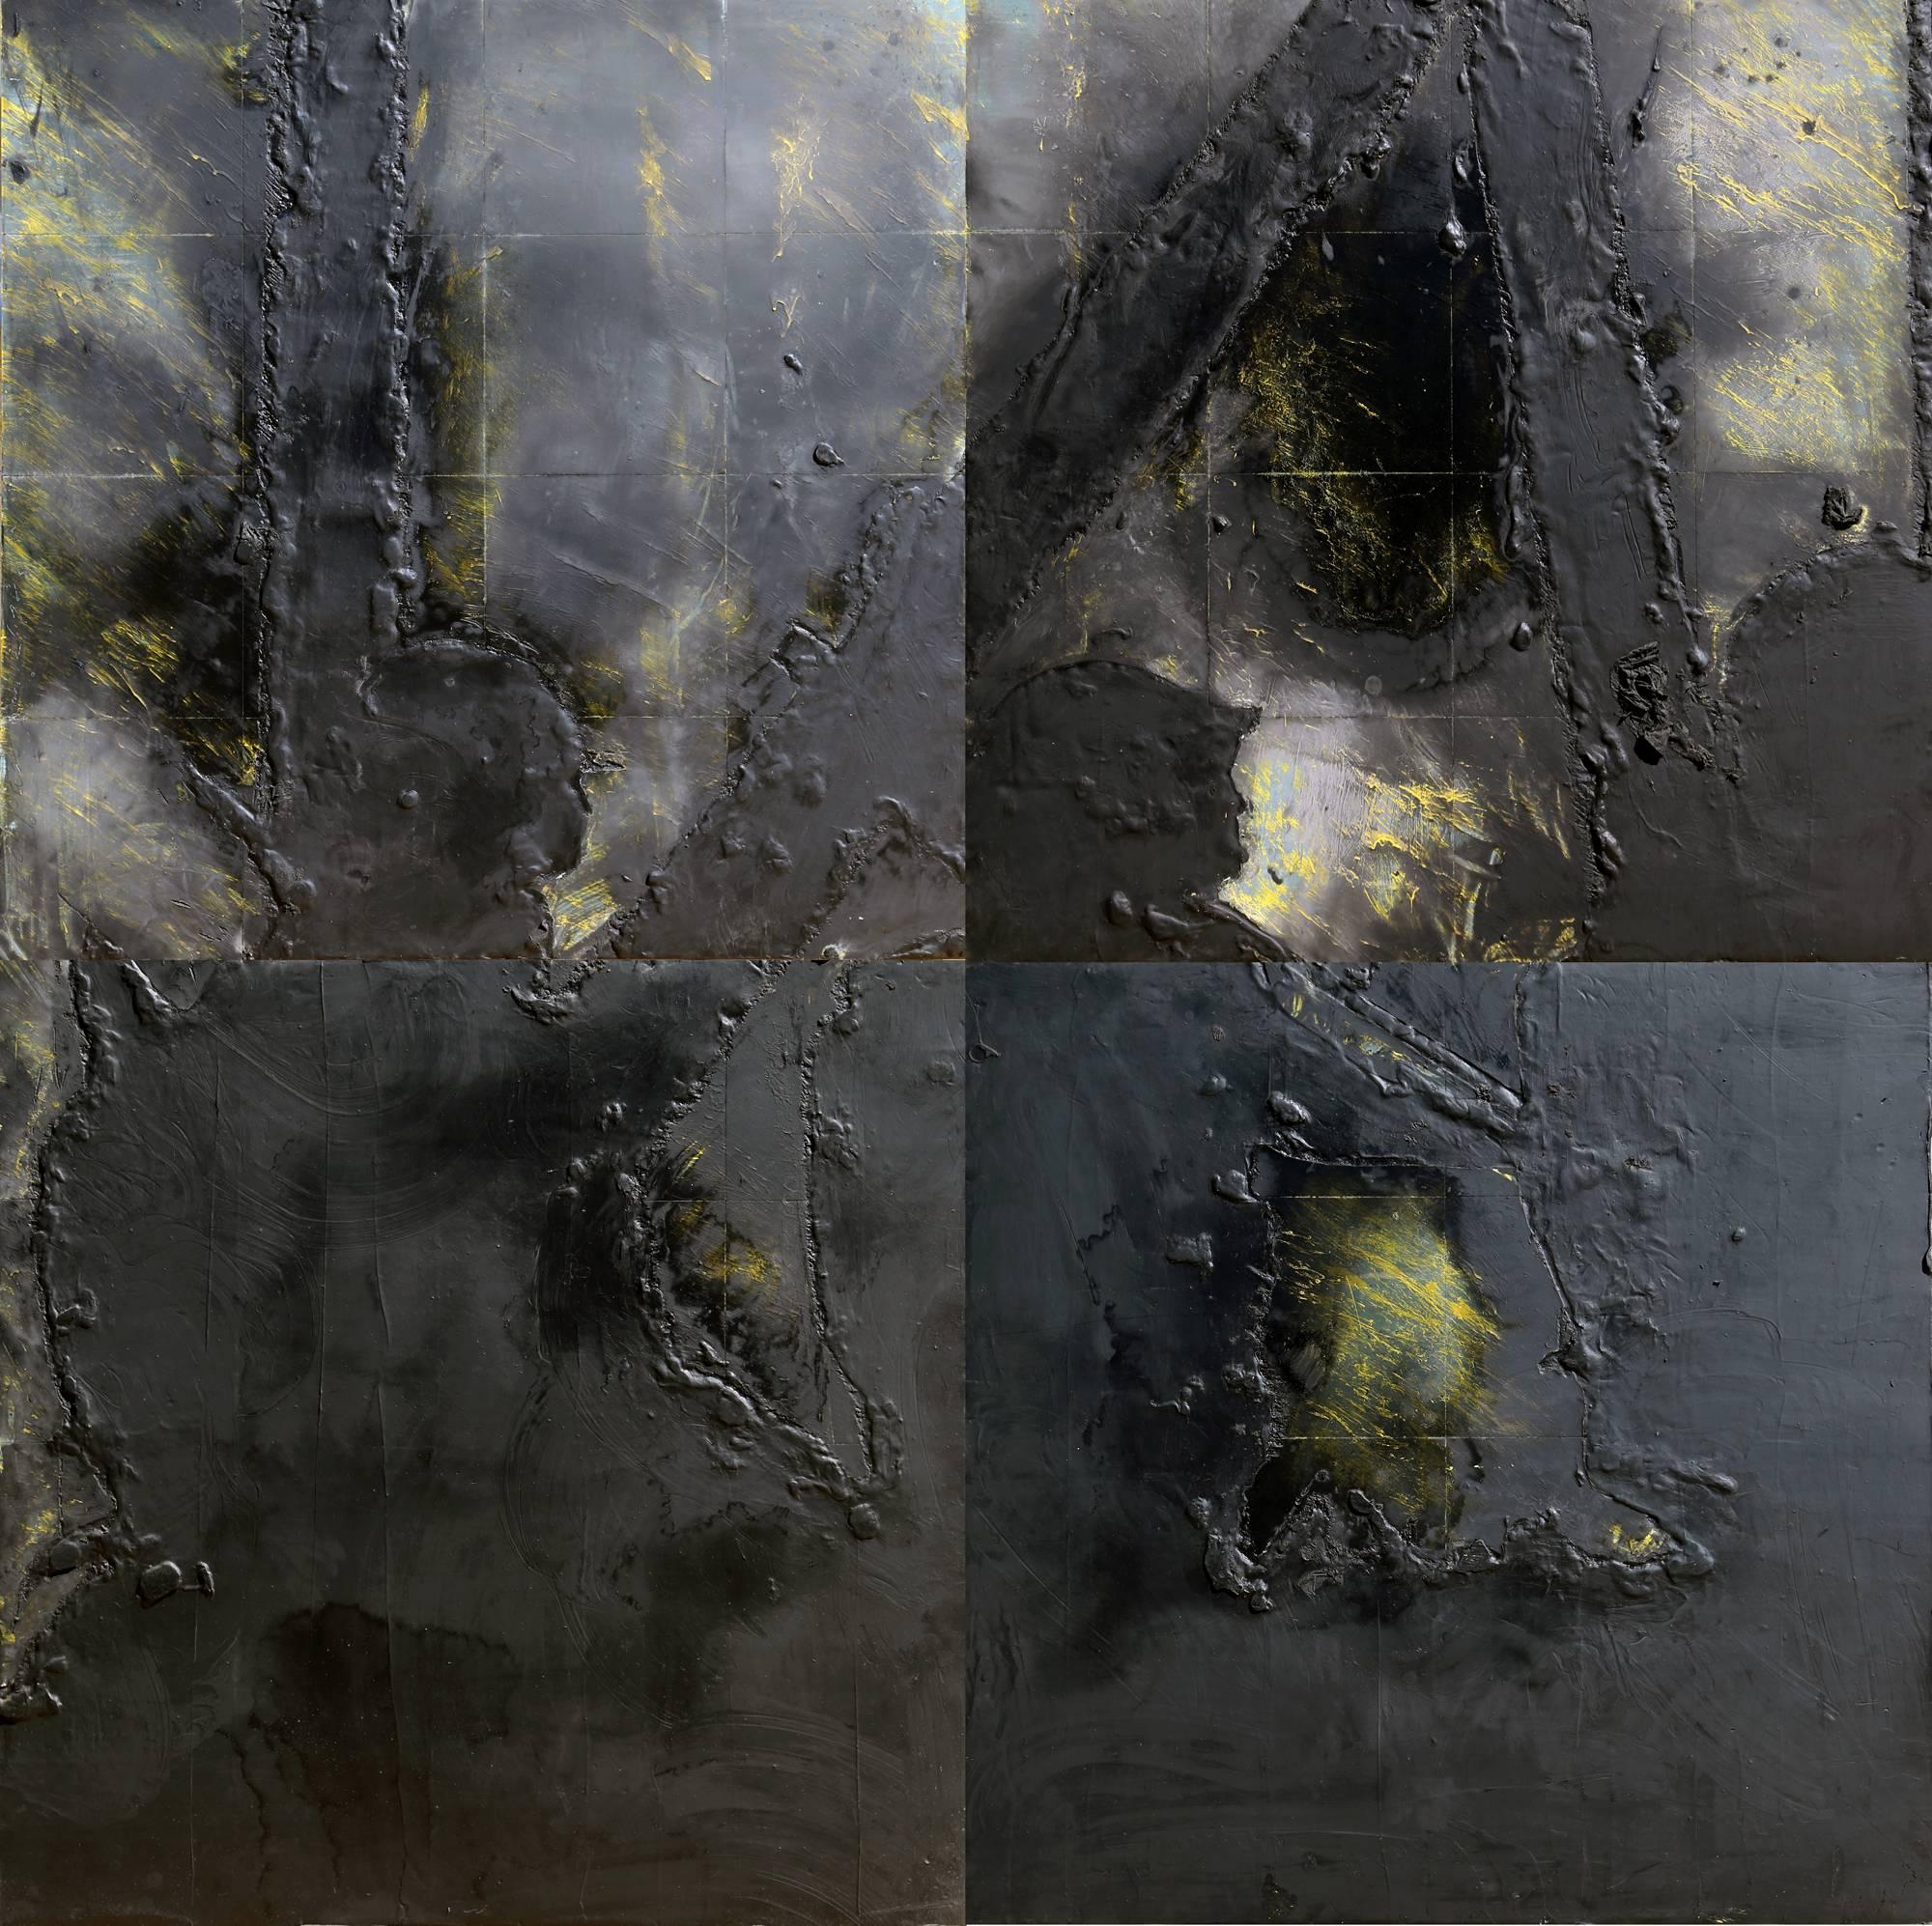 A monumental unique painting in four 48 x 48 inch panels by Donald Sultan.  

Artist: Donald Sultan, American (1951 - )
Title: Two Dog Pass
Year: January 12th, 1988
Medium: Tar and Latex on tile on masonite over wood, signed, titled and dated